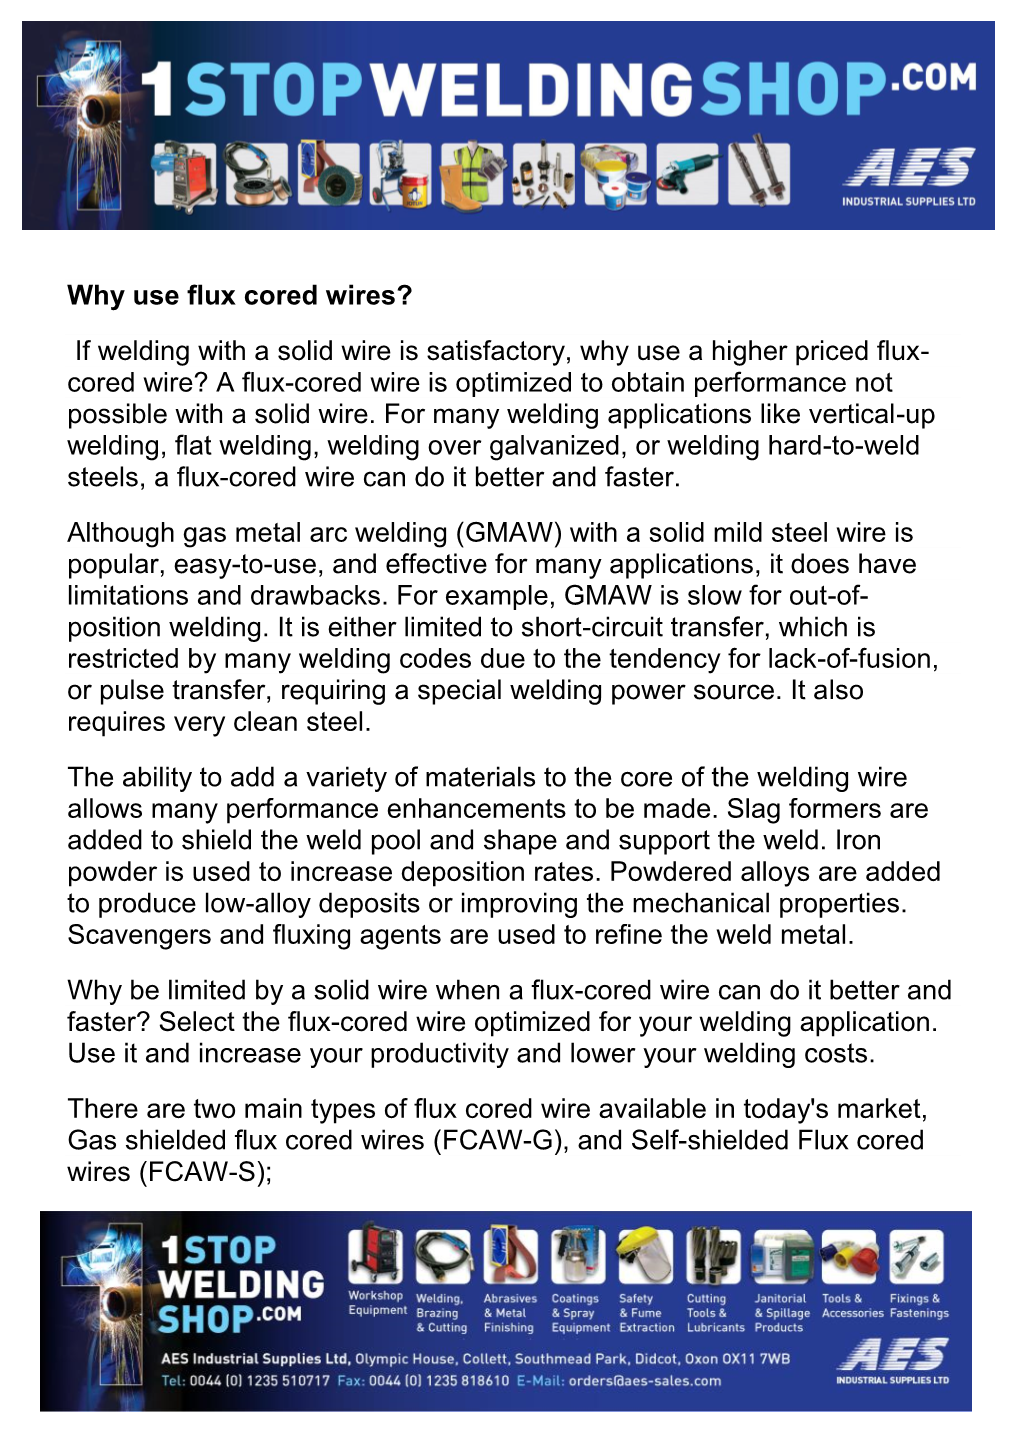 Why Use Flux Cored Wires?